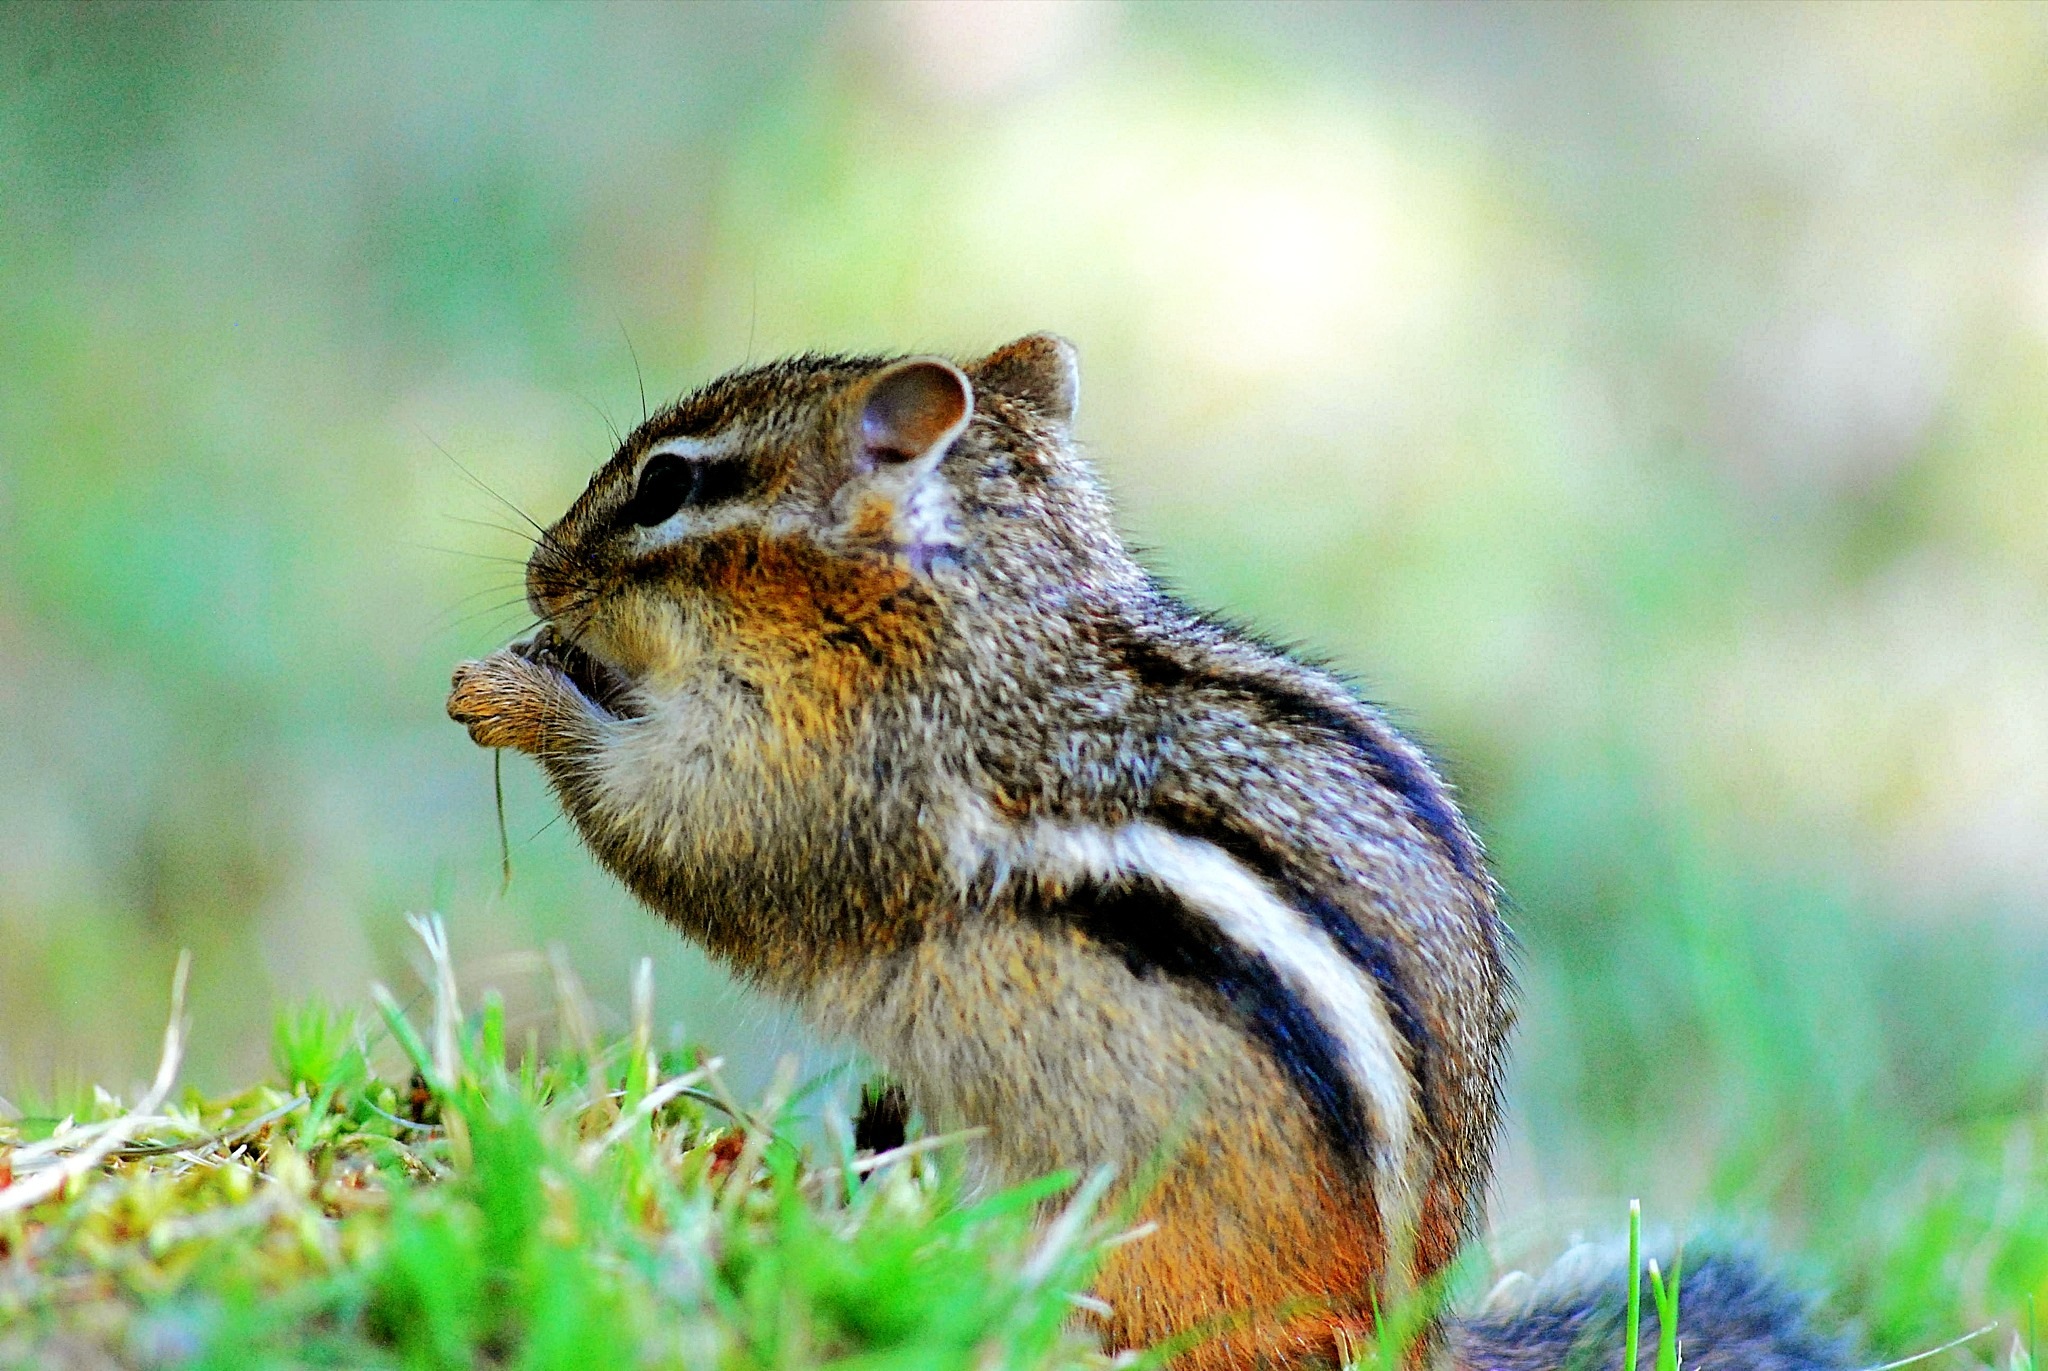 Chipmunk Caught Red-handed (user submitted)